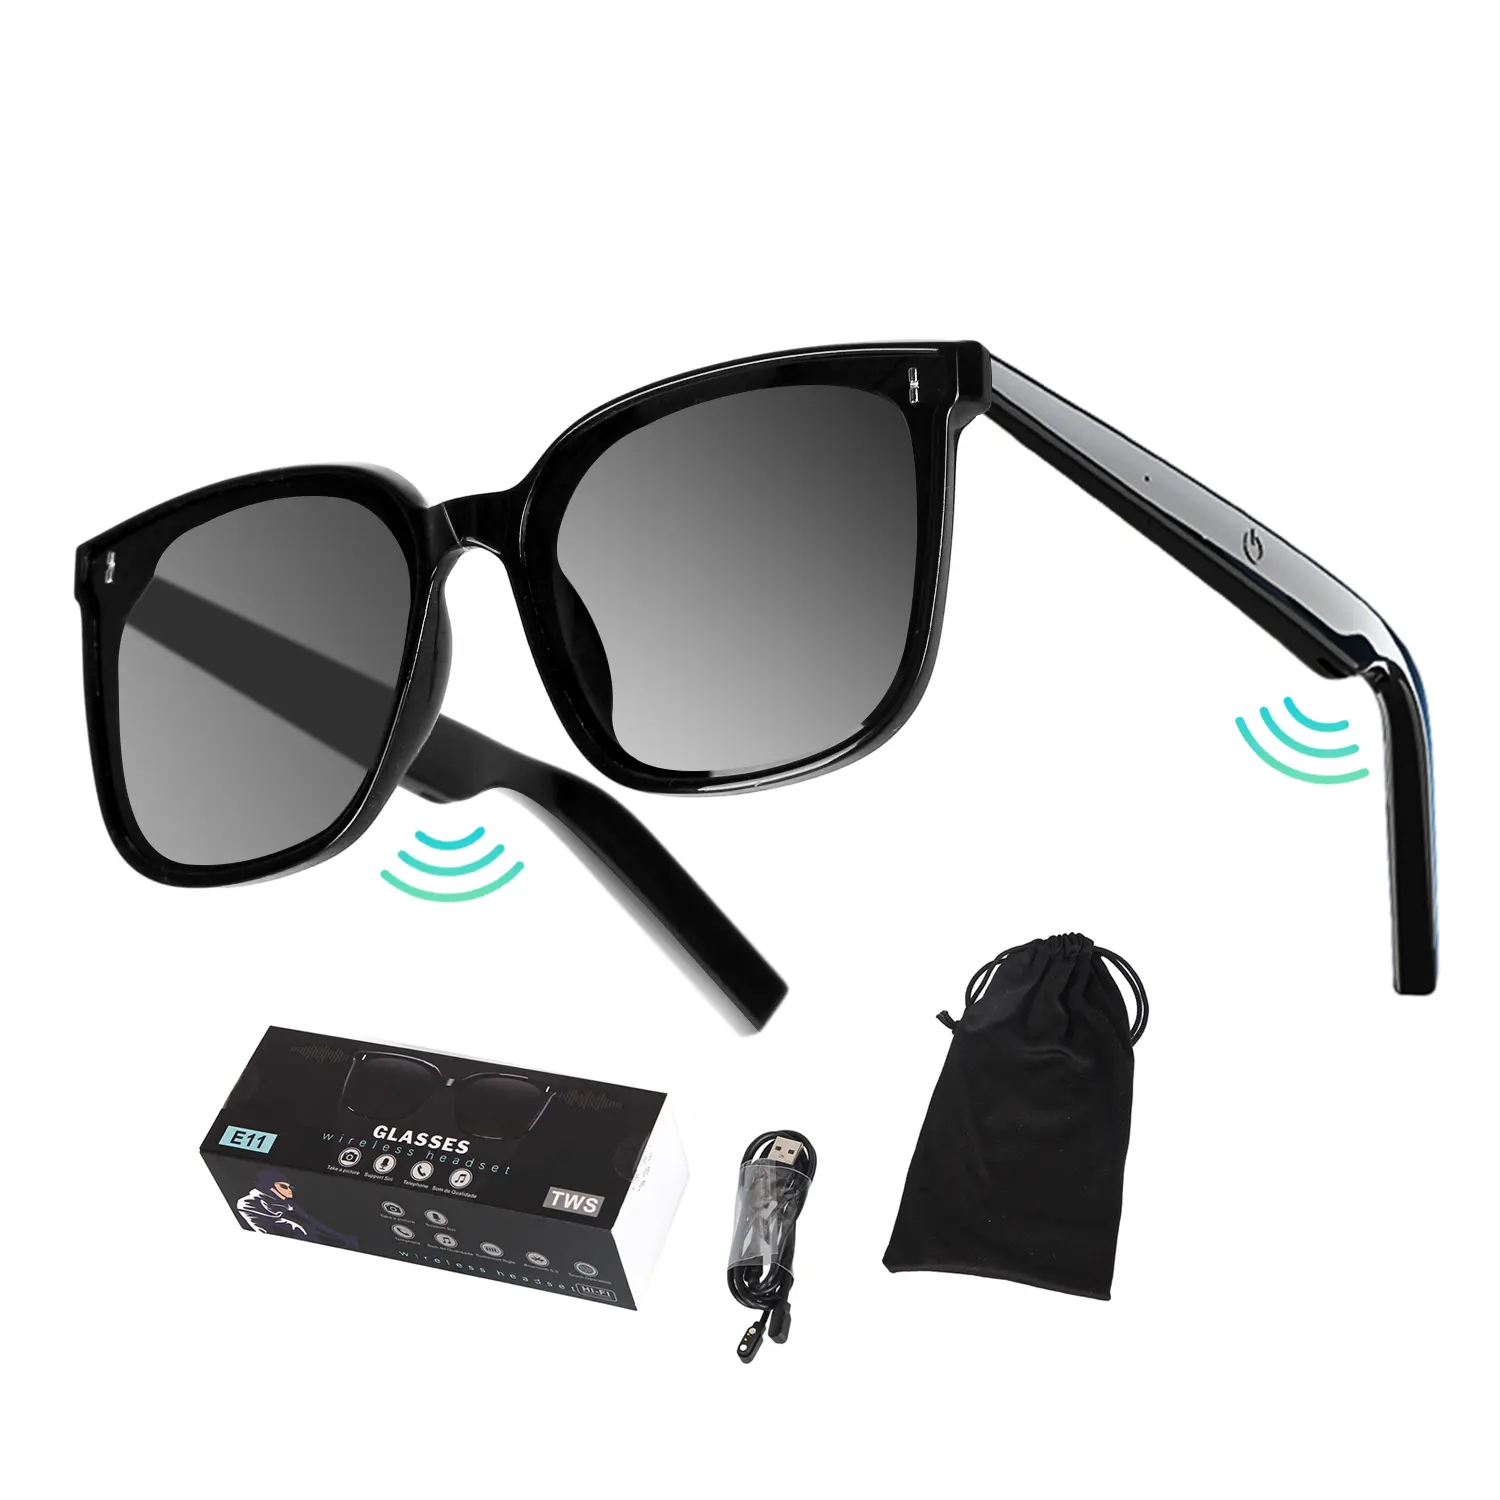 Smart Sunglasses Fashion Touch Music Sport Bl0etooth Headset Sun Glasses Camera Voice Call Control MP3 Glasses For Man Woman